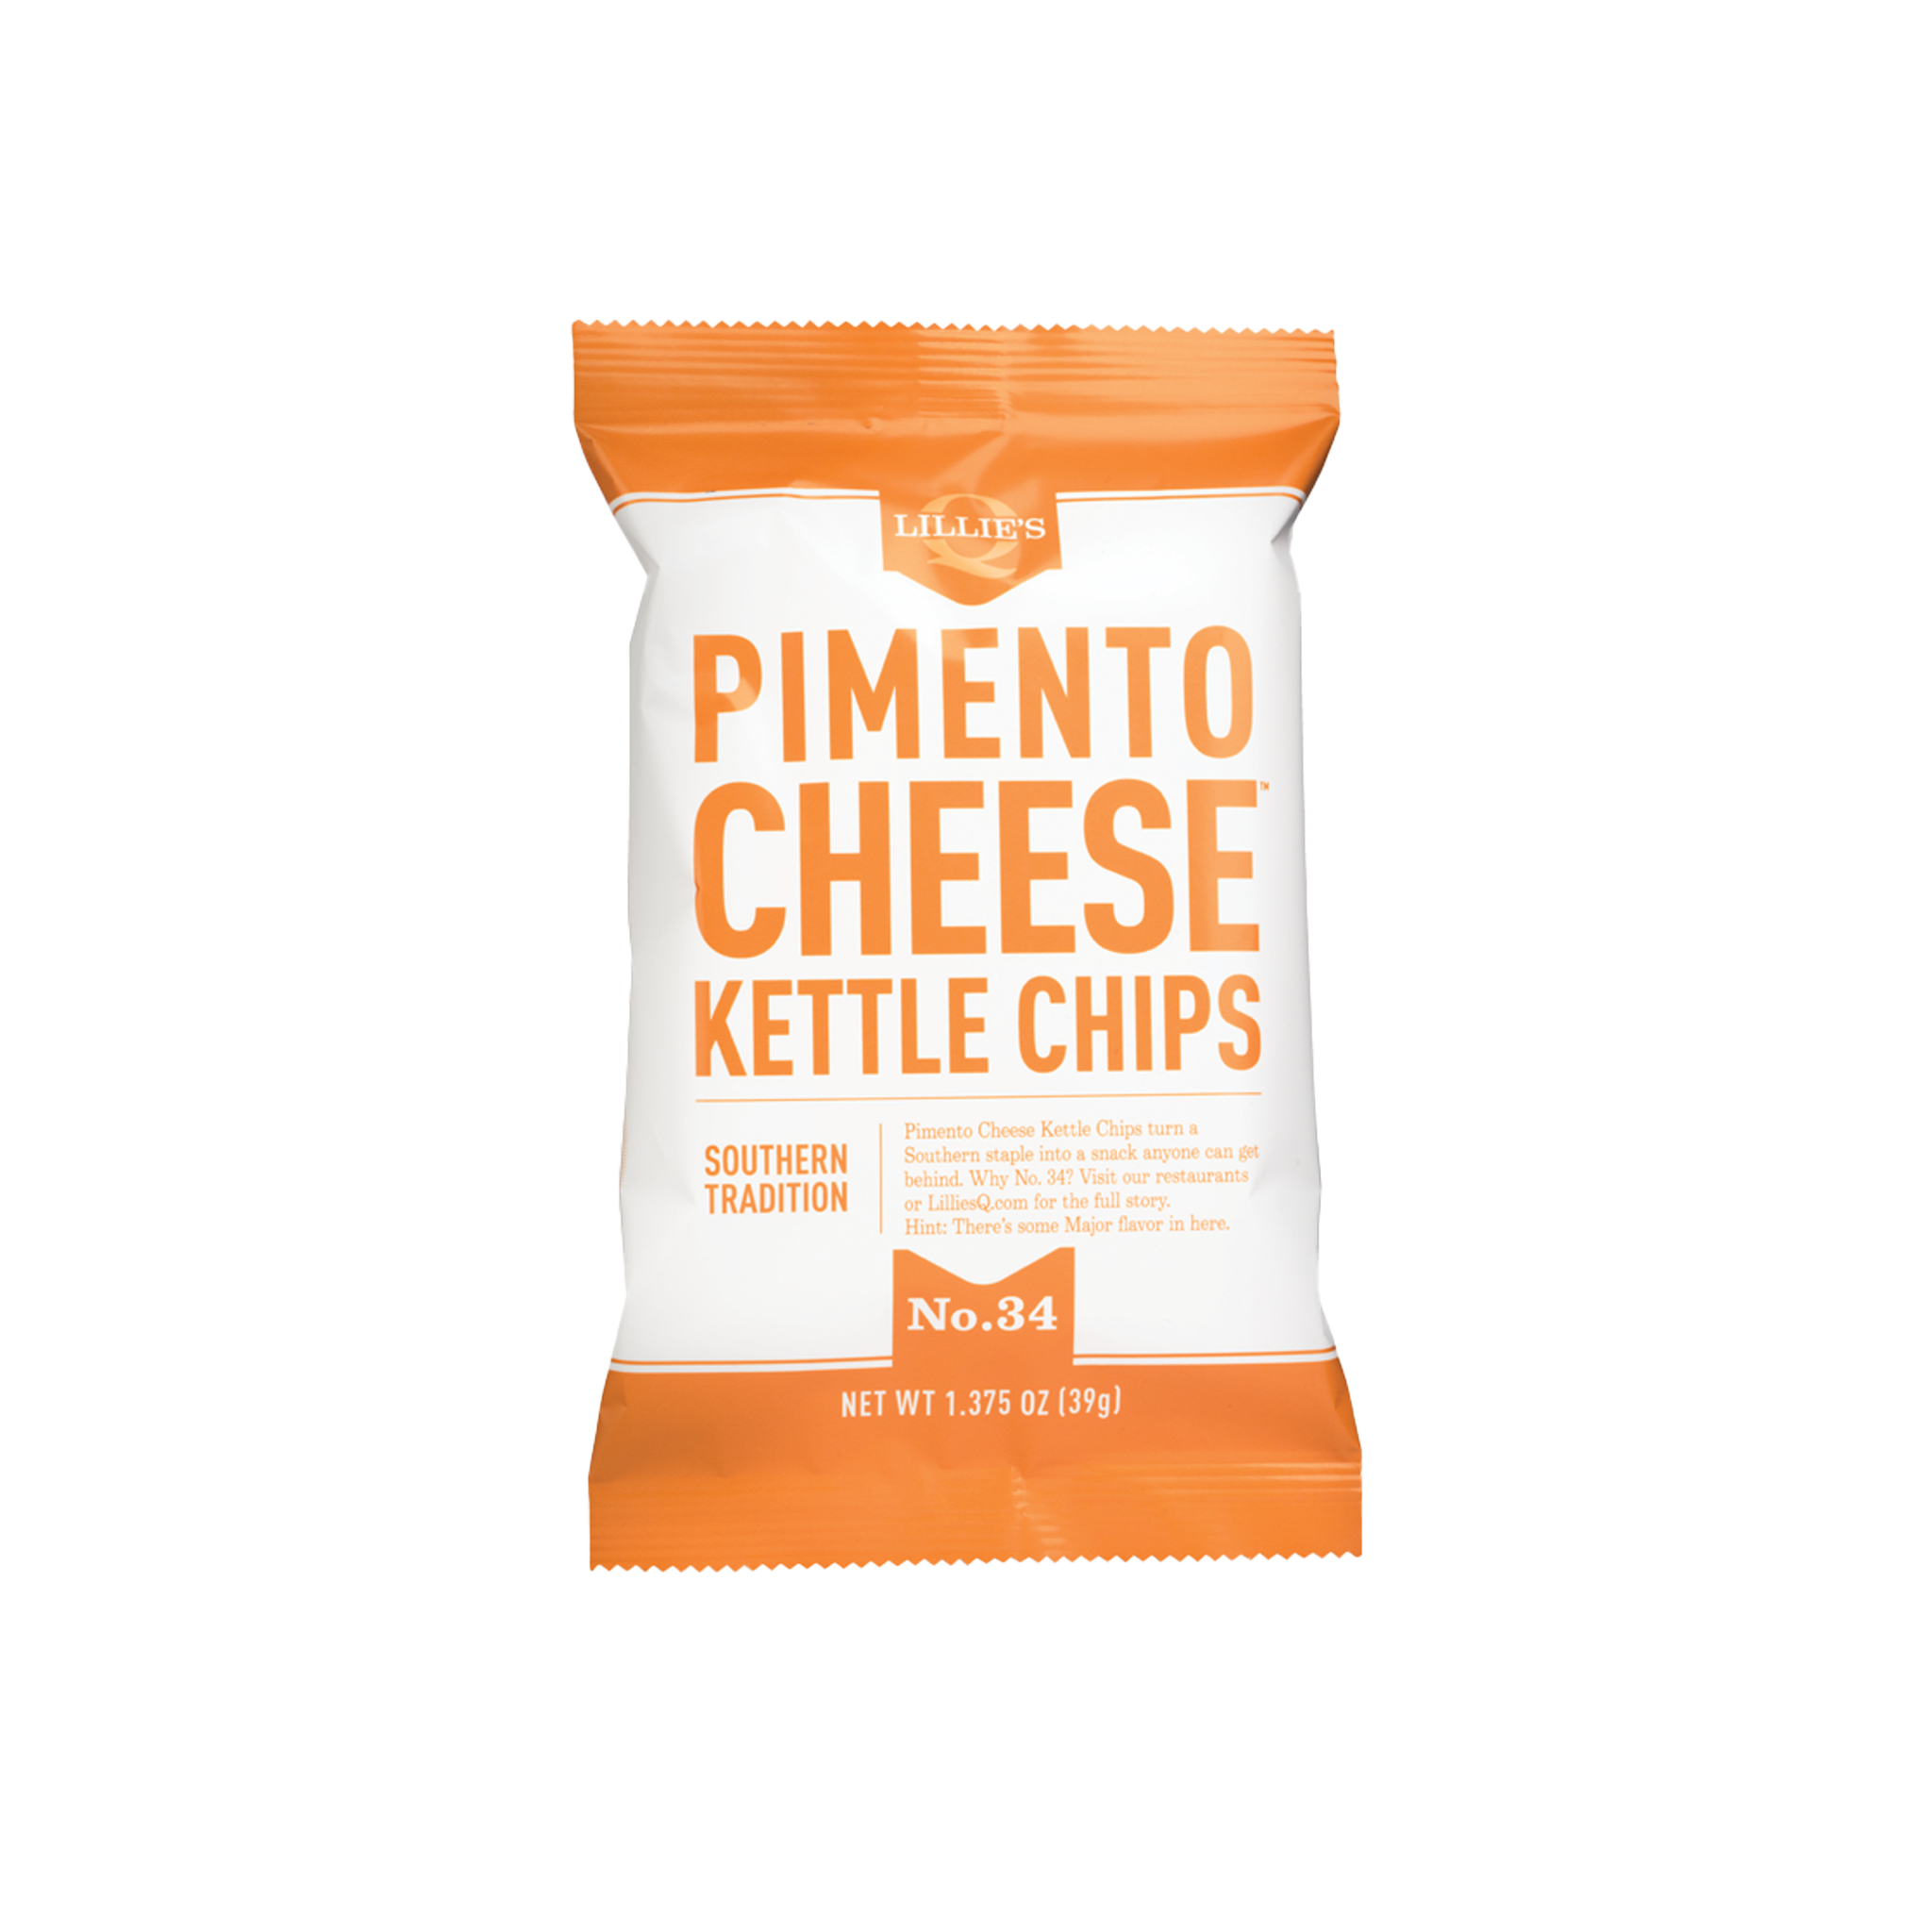 Pimento Cheese Kettle Chips (1.375 oz Multi-Packs)